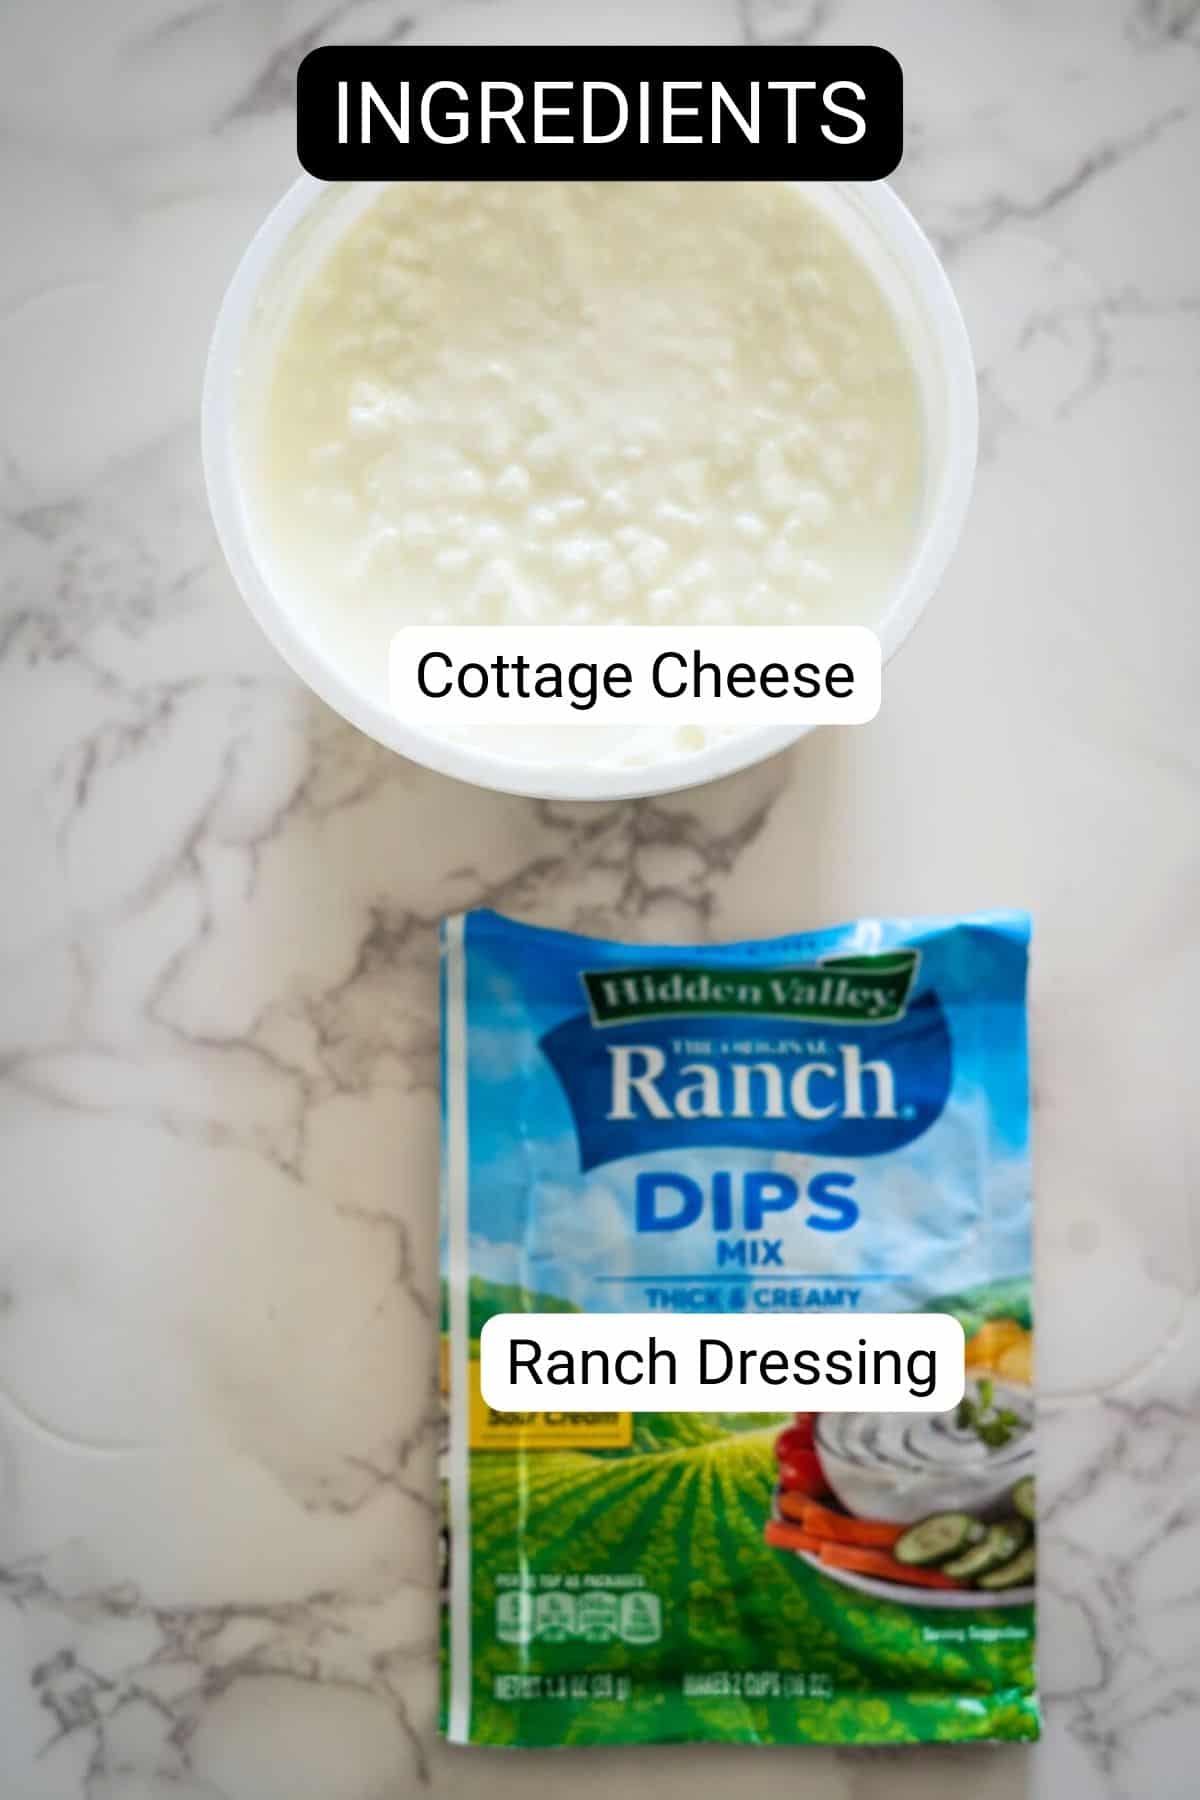 Container of cottage cheese and a packet of ranch dressing mix on a marble surface with a label reading "ingredients.